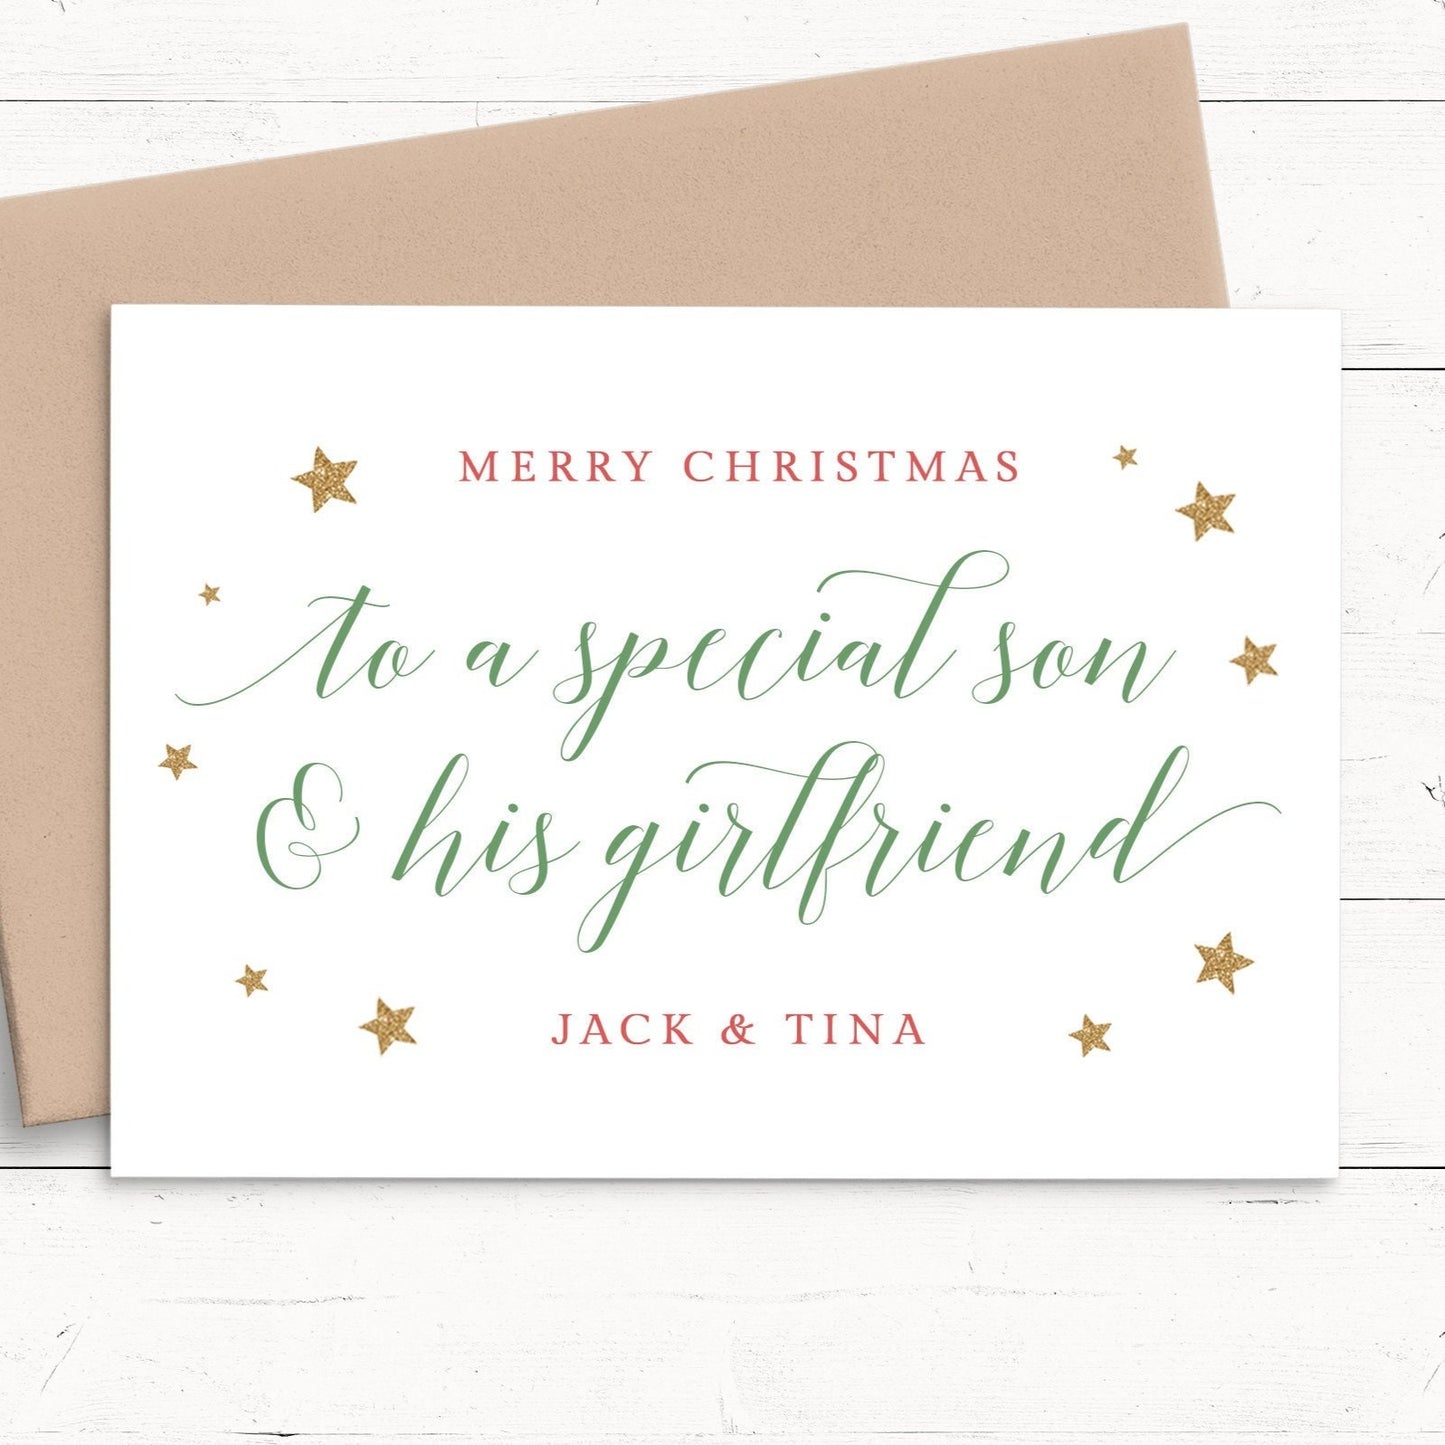 merry christmas special son and girlfriend personalised christmas card matte white cardstock kraft brown envelope boy man son girlfriend couple partners